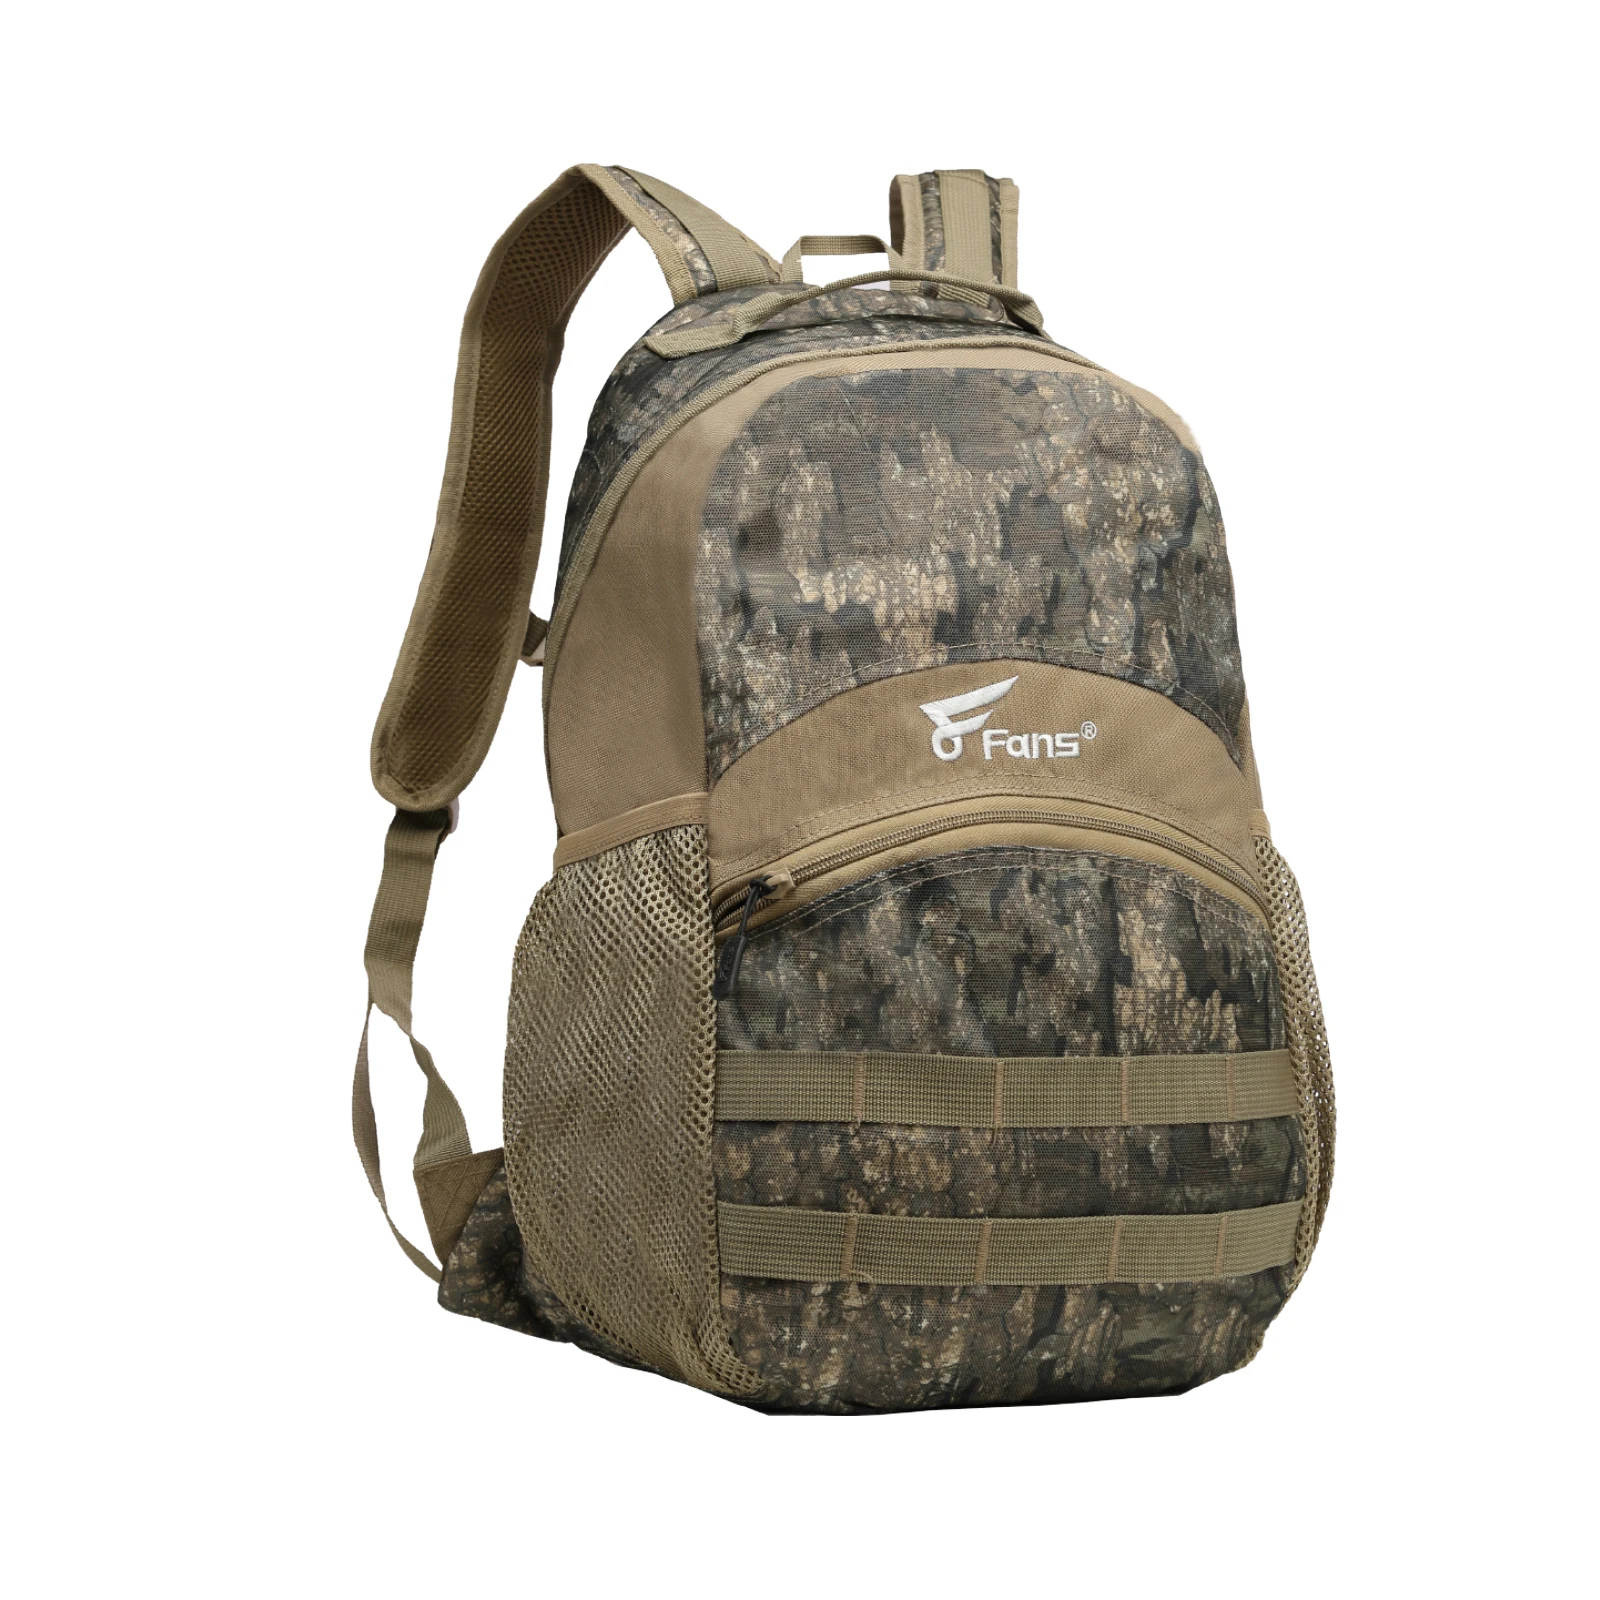 8Fans Hunting Backpack, Realtree Timber Camo Hunting Bag Durable Large Capacity Hunting Pack for Hunting Hiking Camp